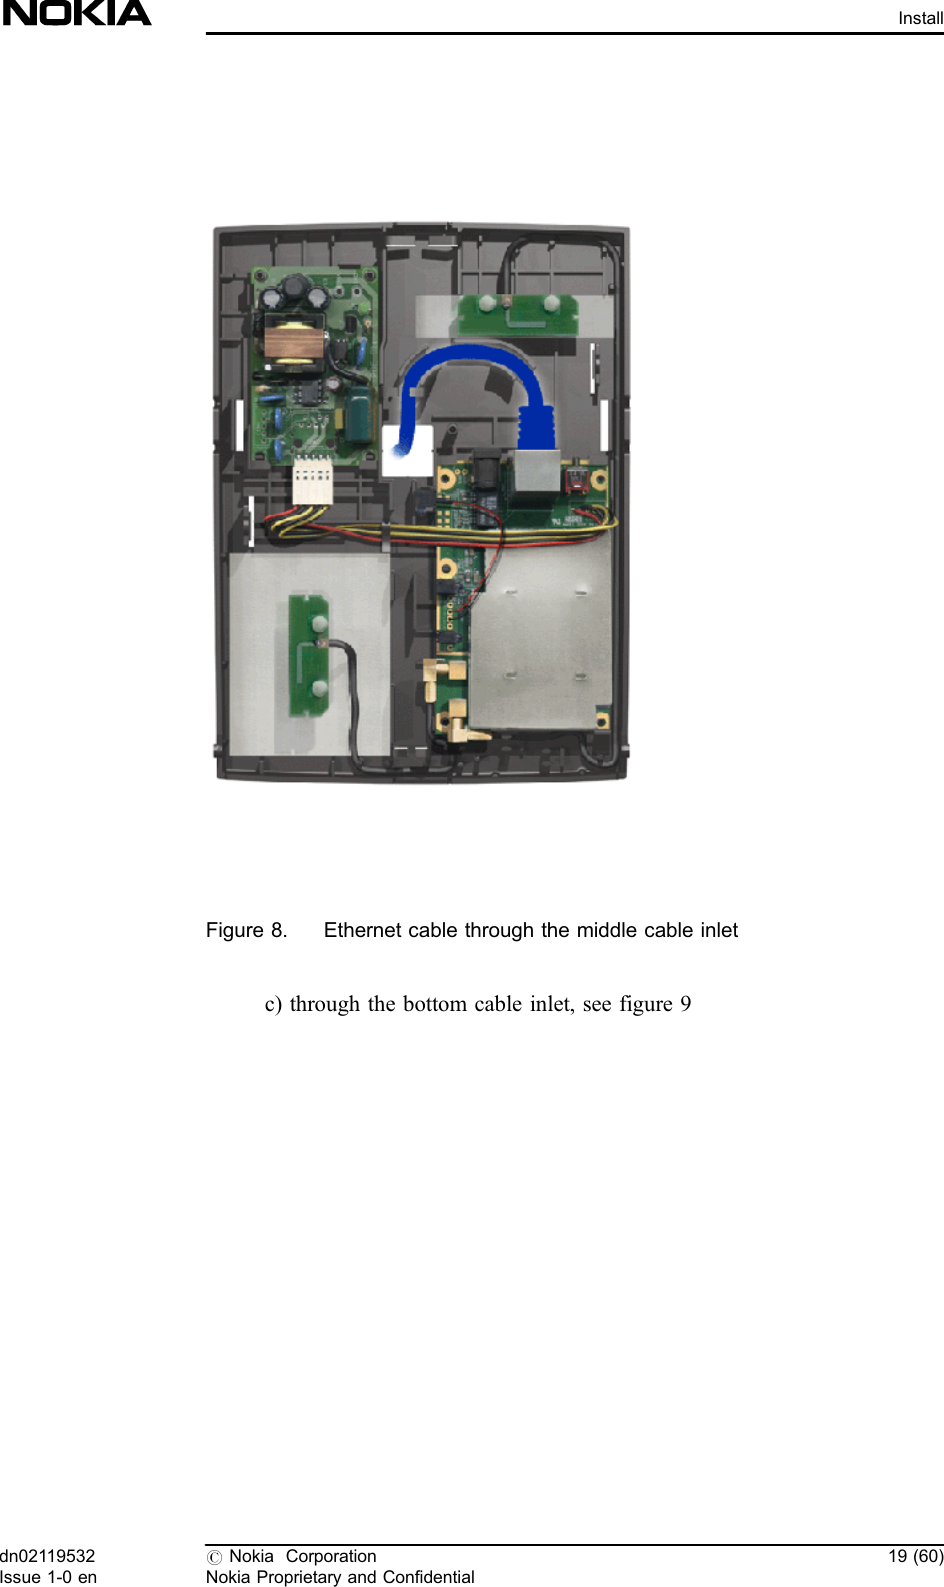 Figure 8. Ethernet cable through the middle cable inletc) through the bottom cable inlet, see figure 9dn02119532Issue 1-0 en#Nokia CorporationNokia Proprietary and Confidential19 (60)Install